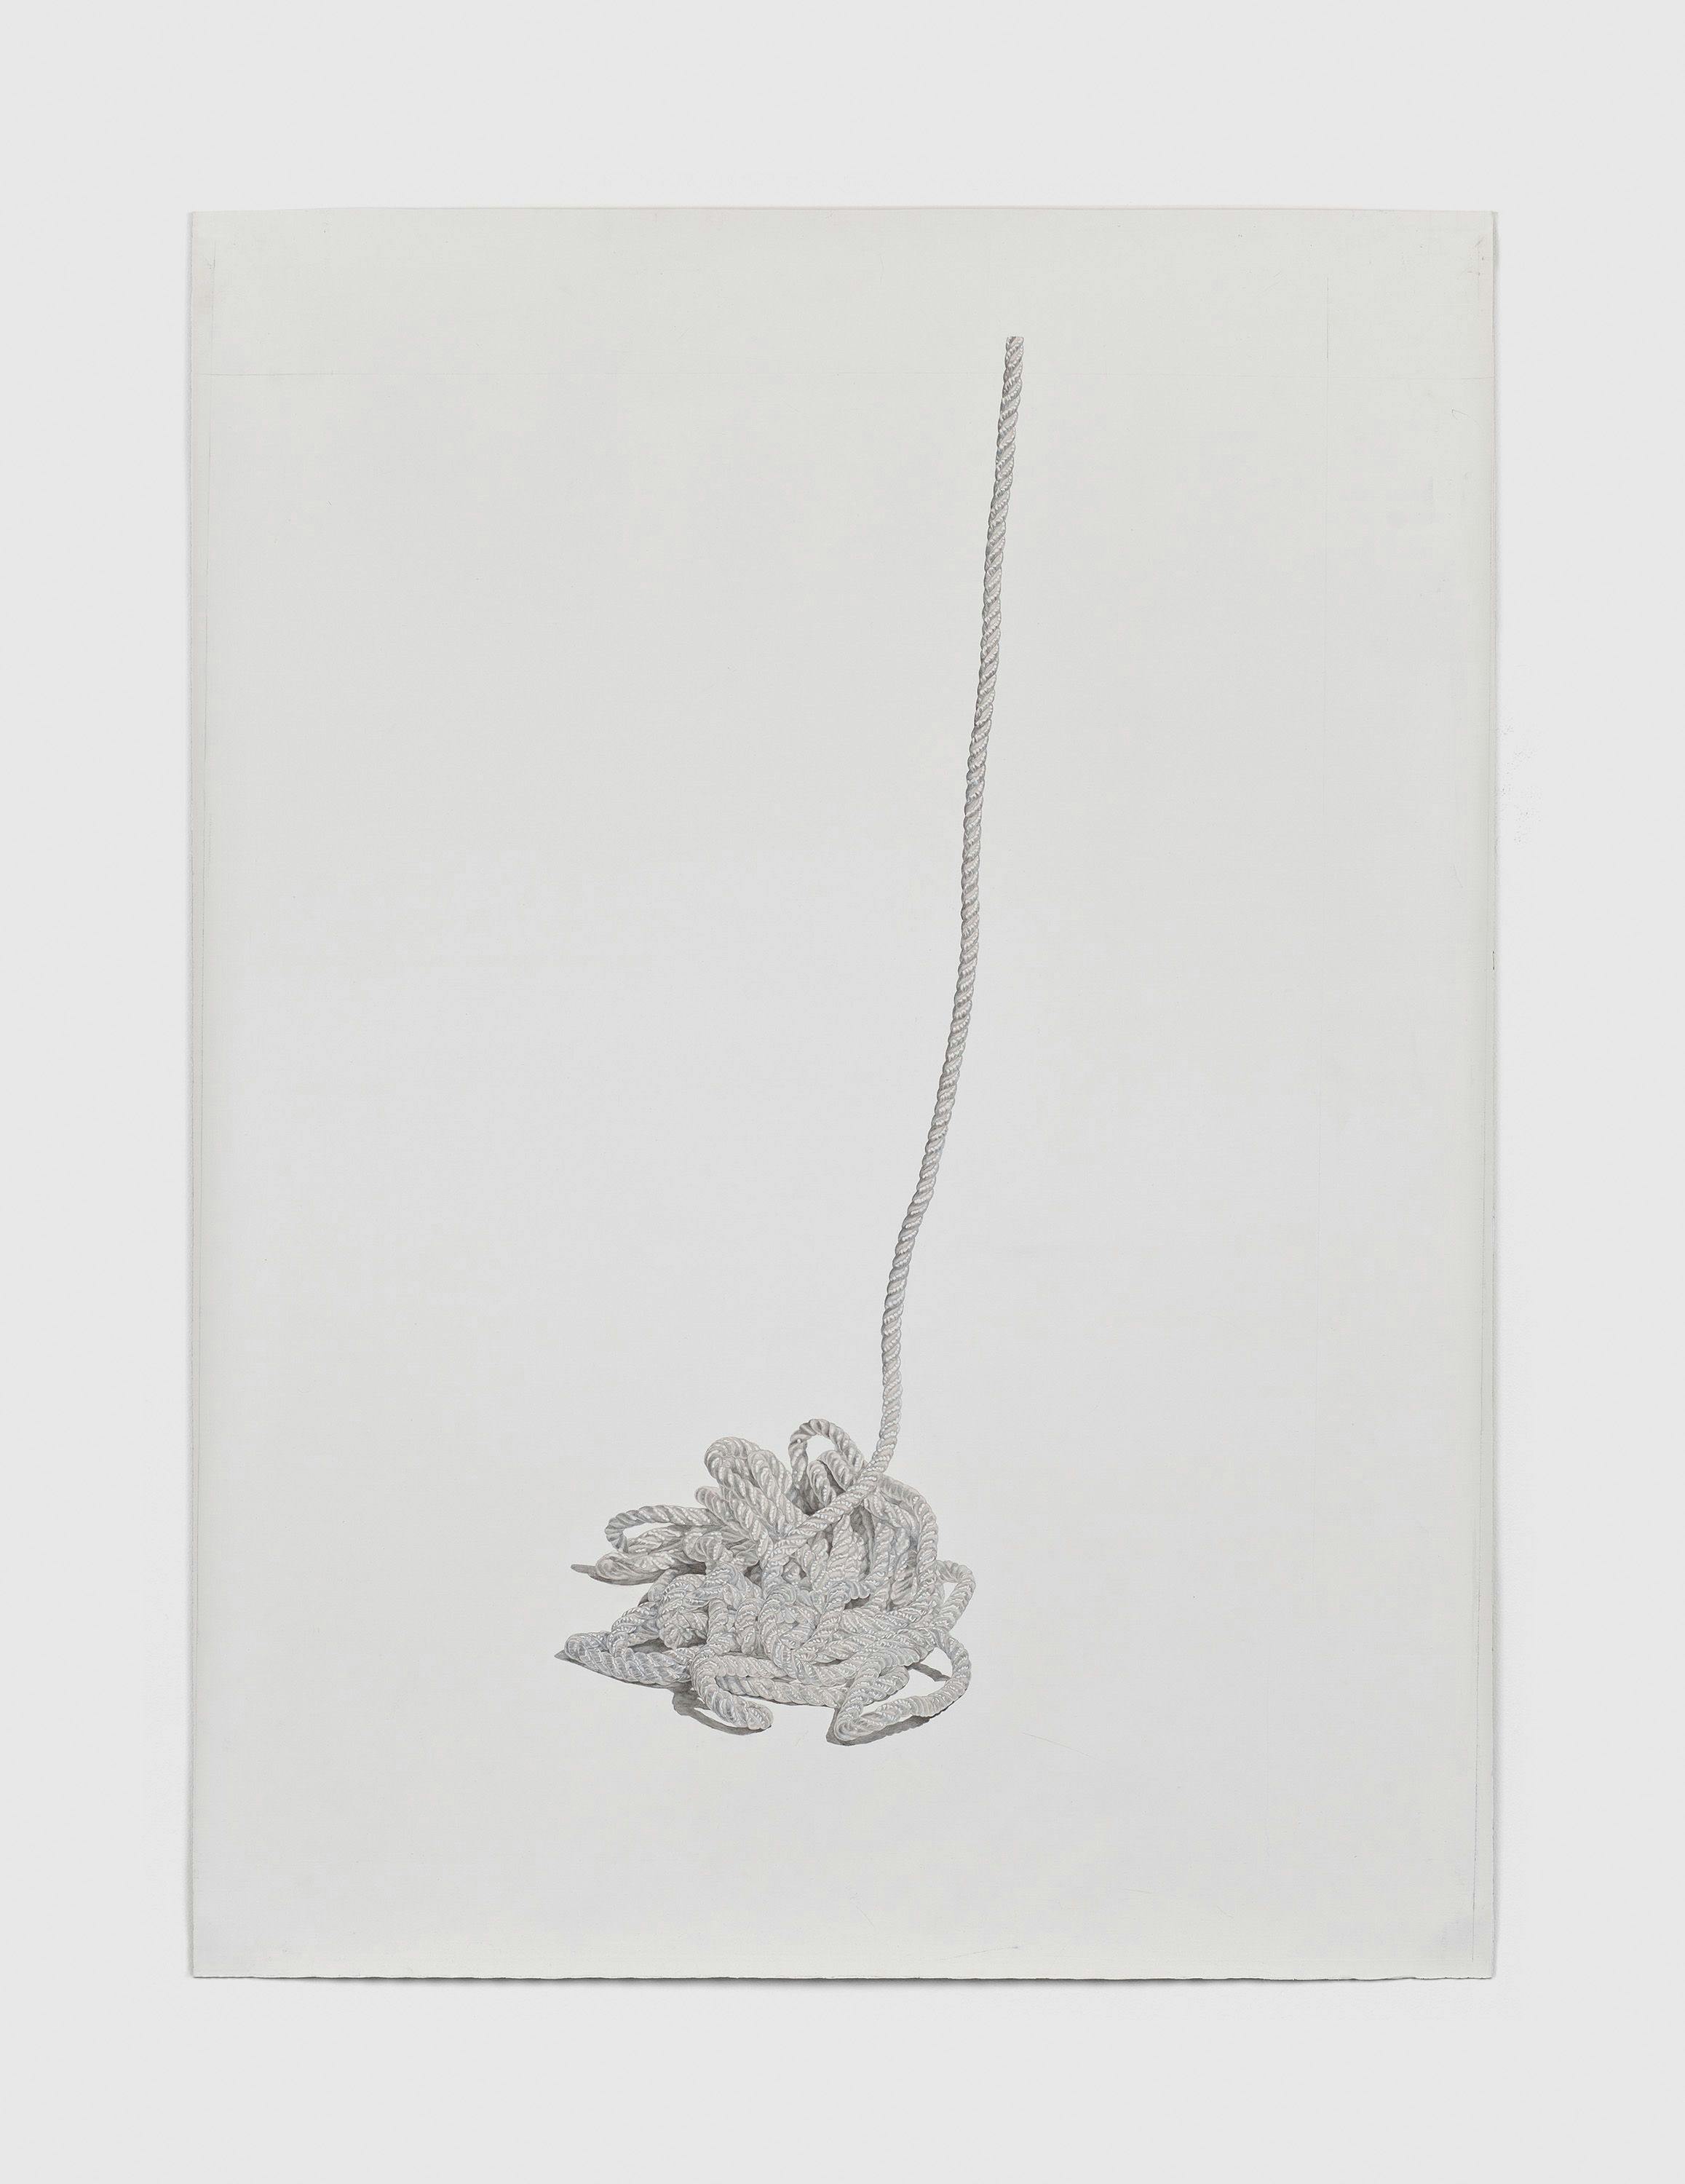 A painting by Toba Khedoori, titled Untitled (rope 2), dated 2011.